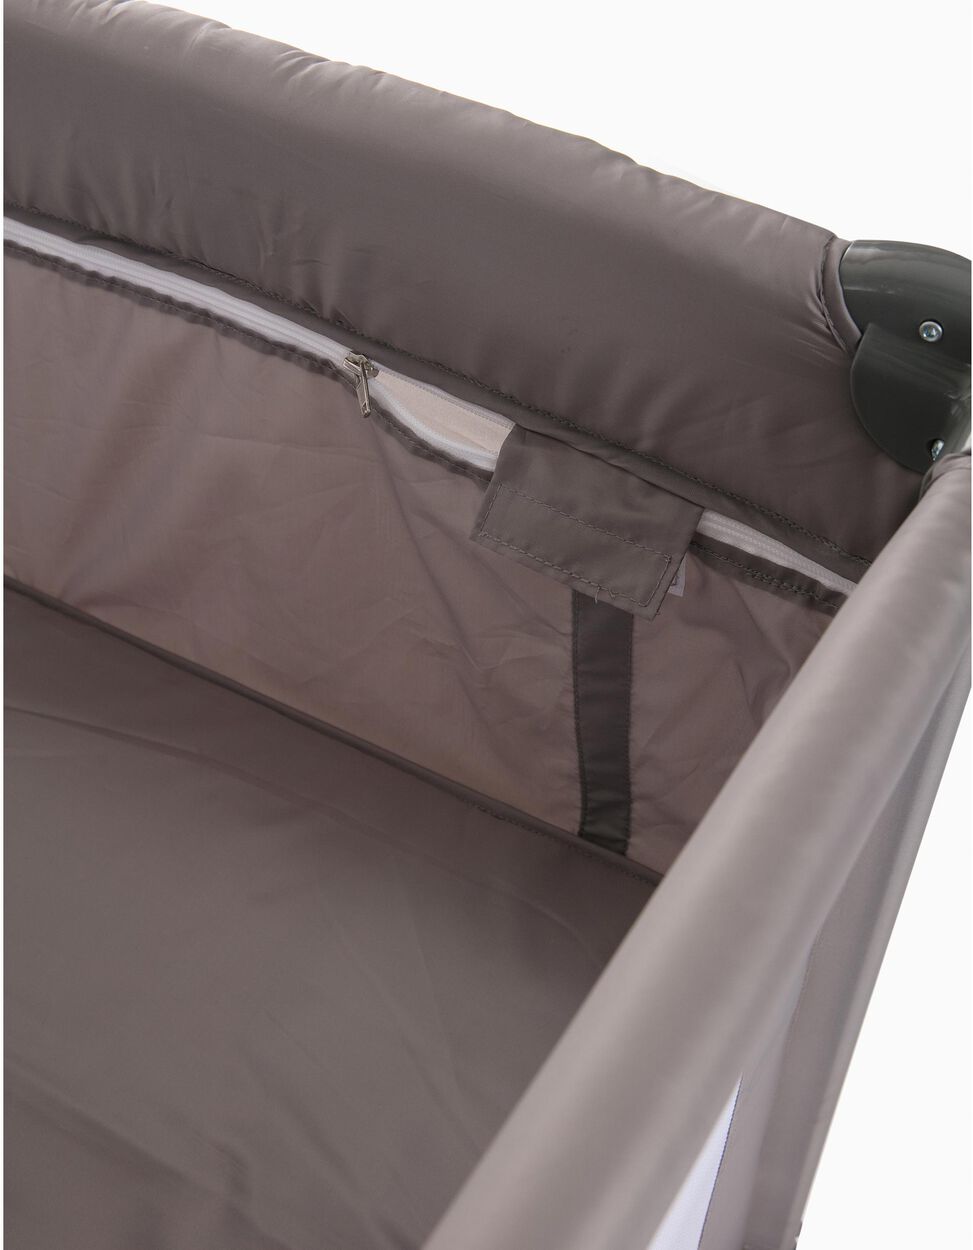 Nappy Travel Cot by Zy Baby